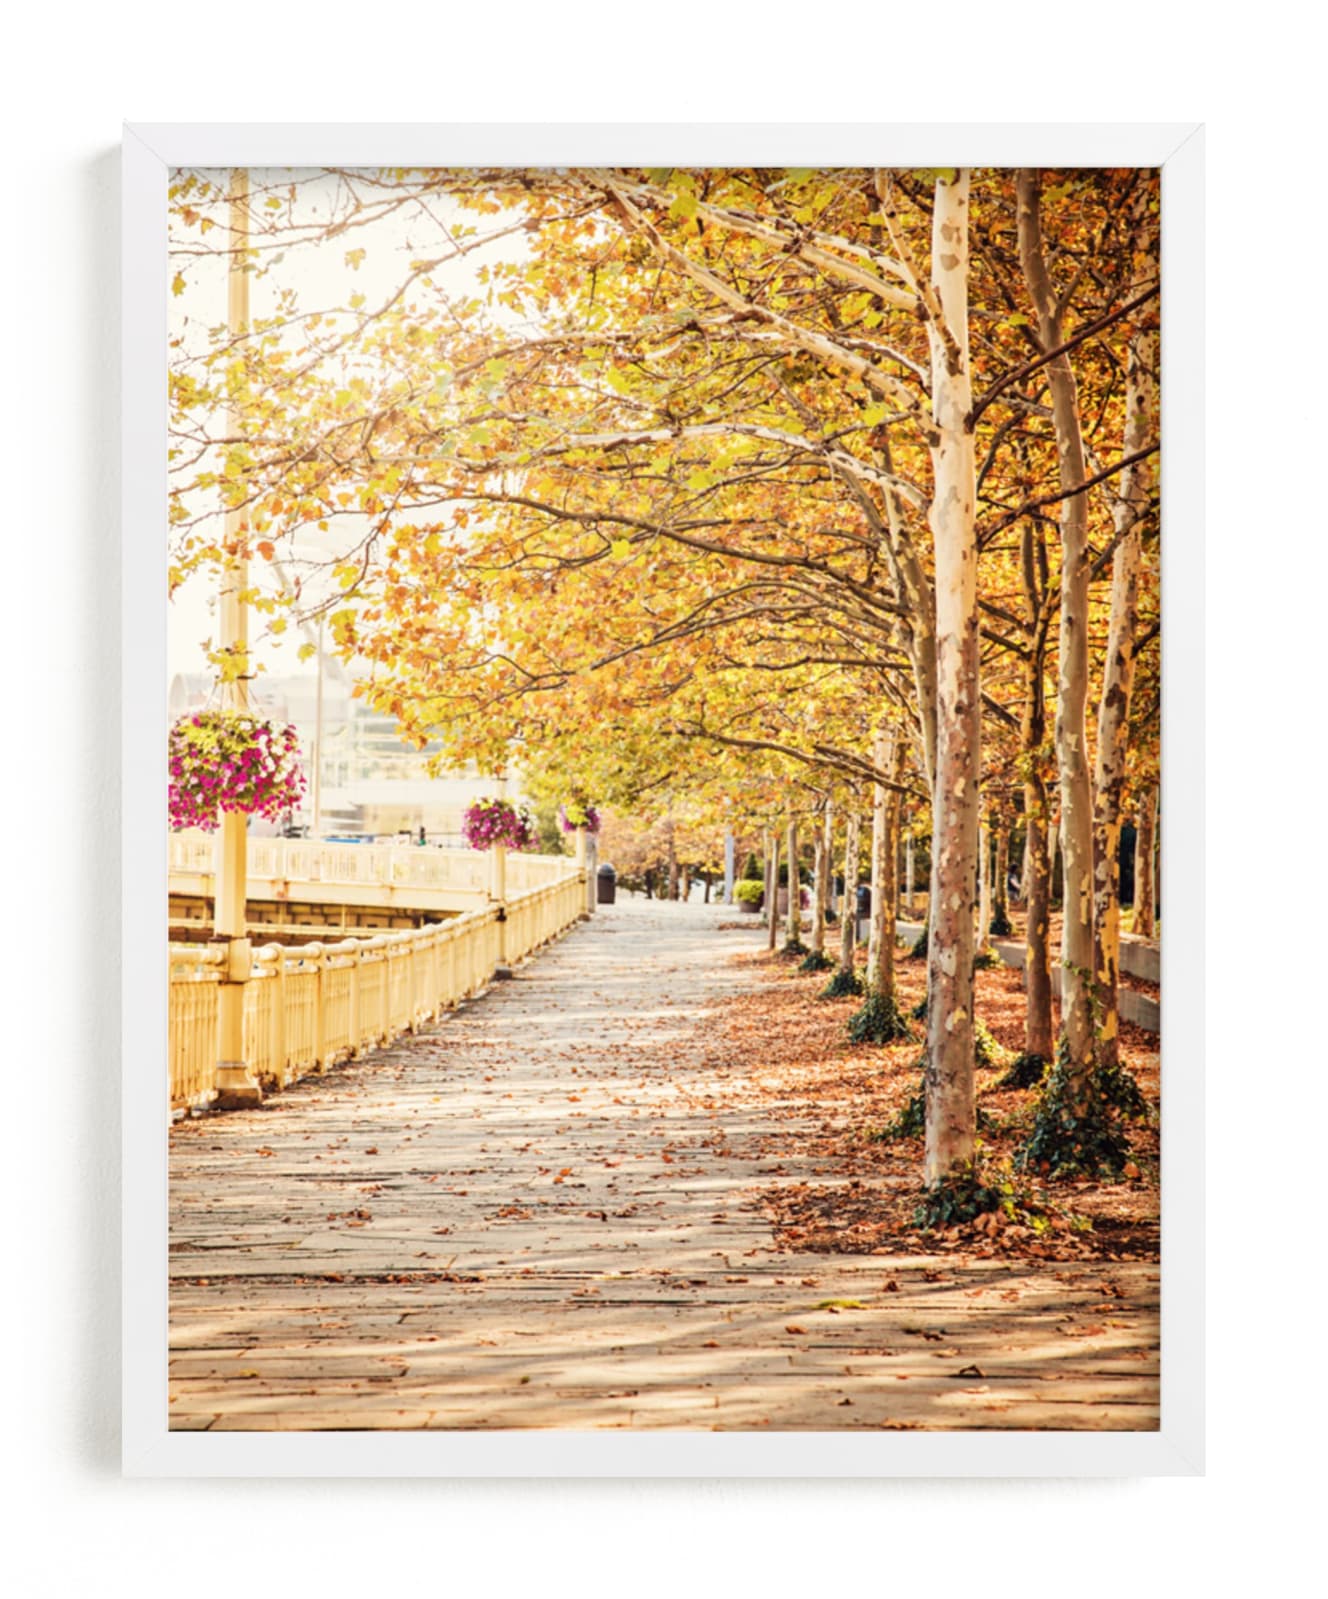 "Fall Tree-lined Street" - Art Print by Erin Niehenke in beautiful frame options and a variety of sizes.